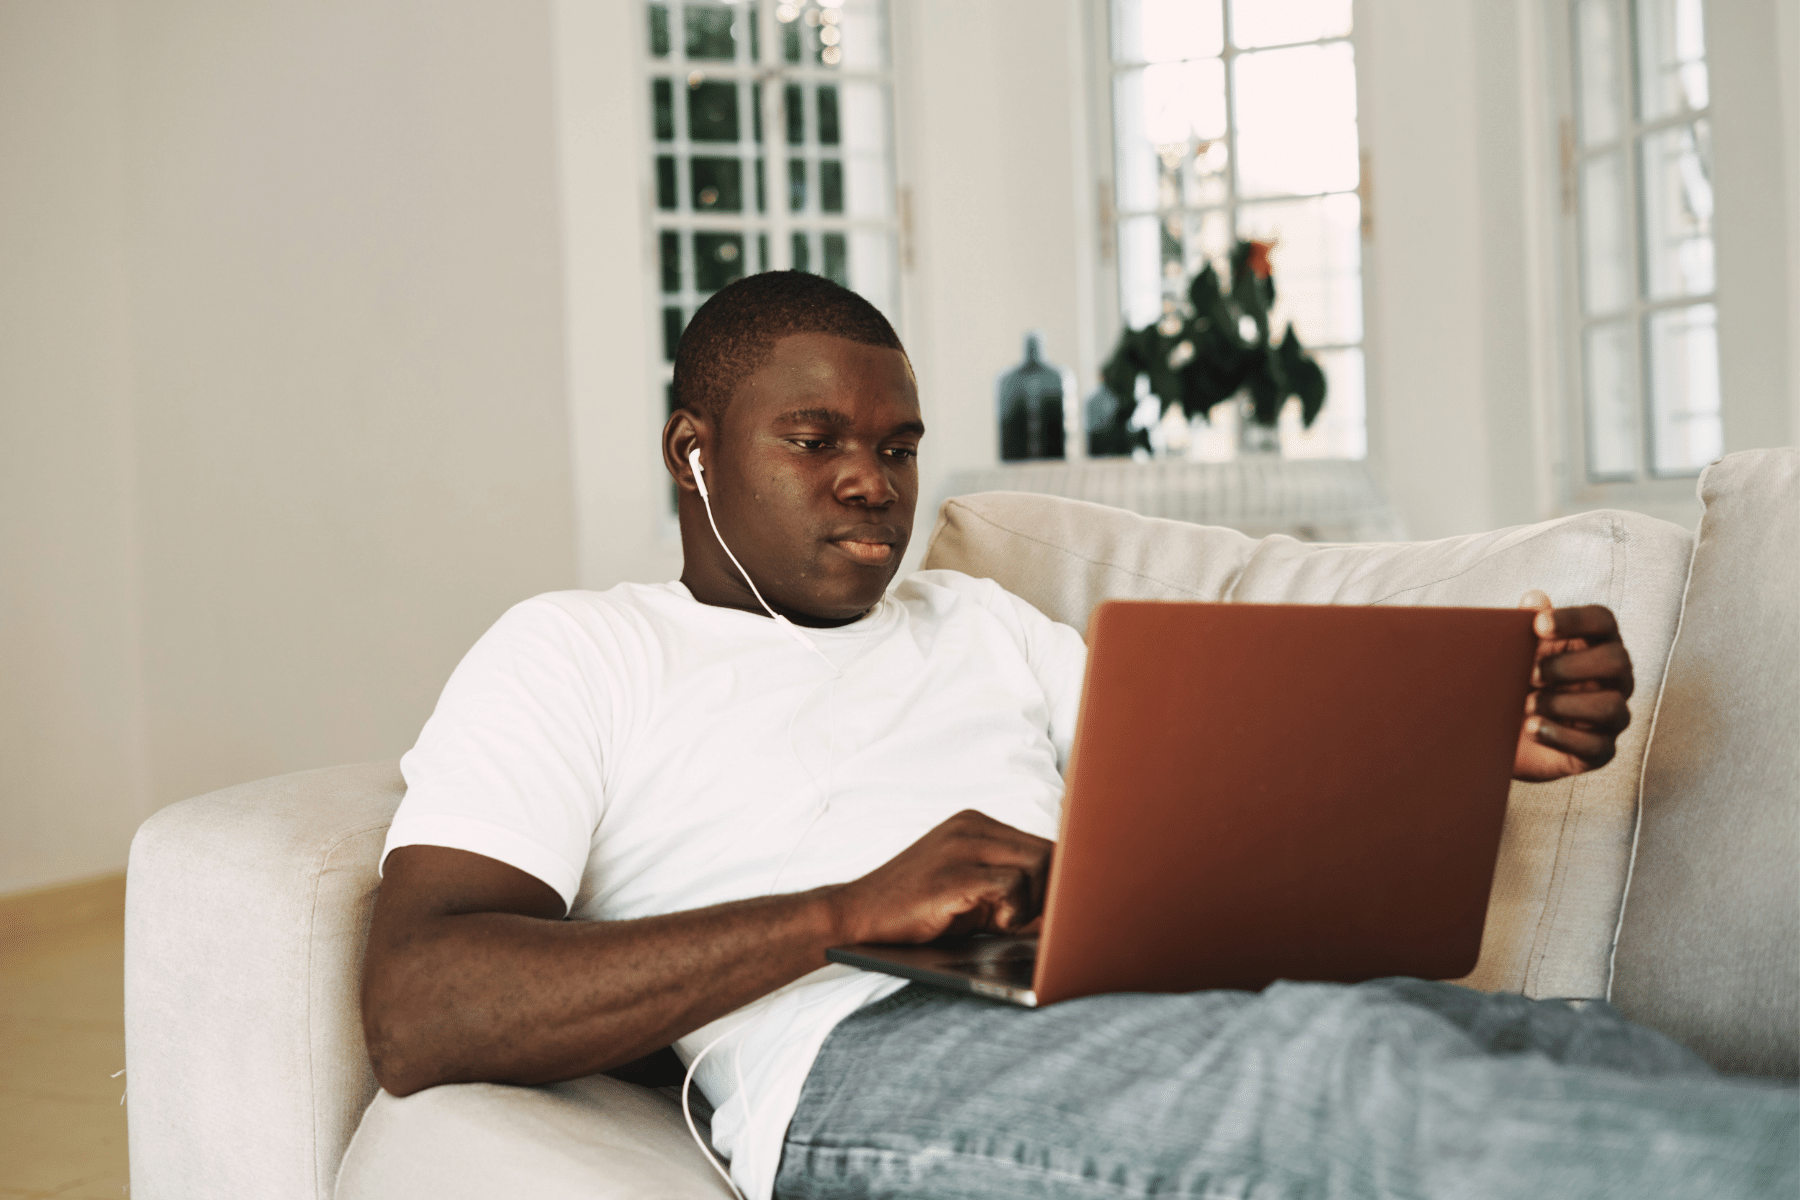 Young man sitting on couch with laptop in his lap while listening through headphones